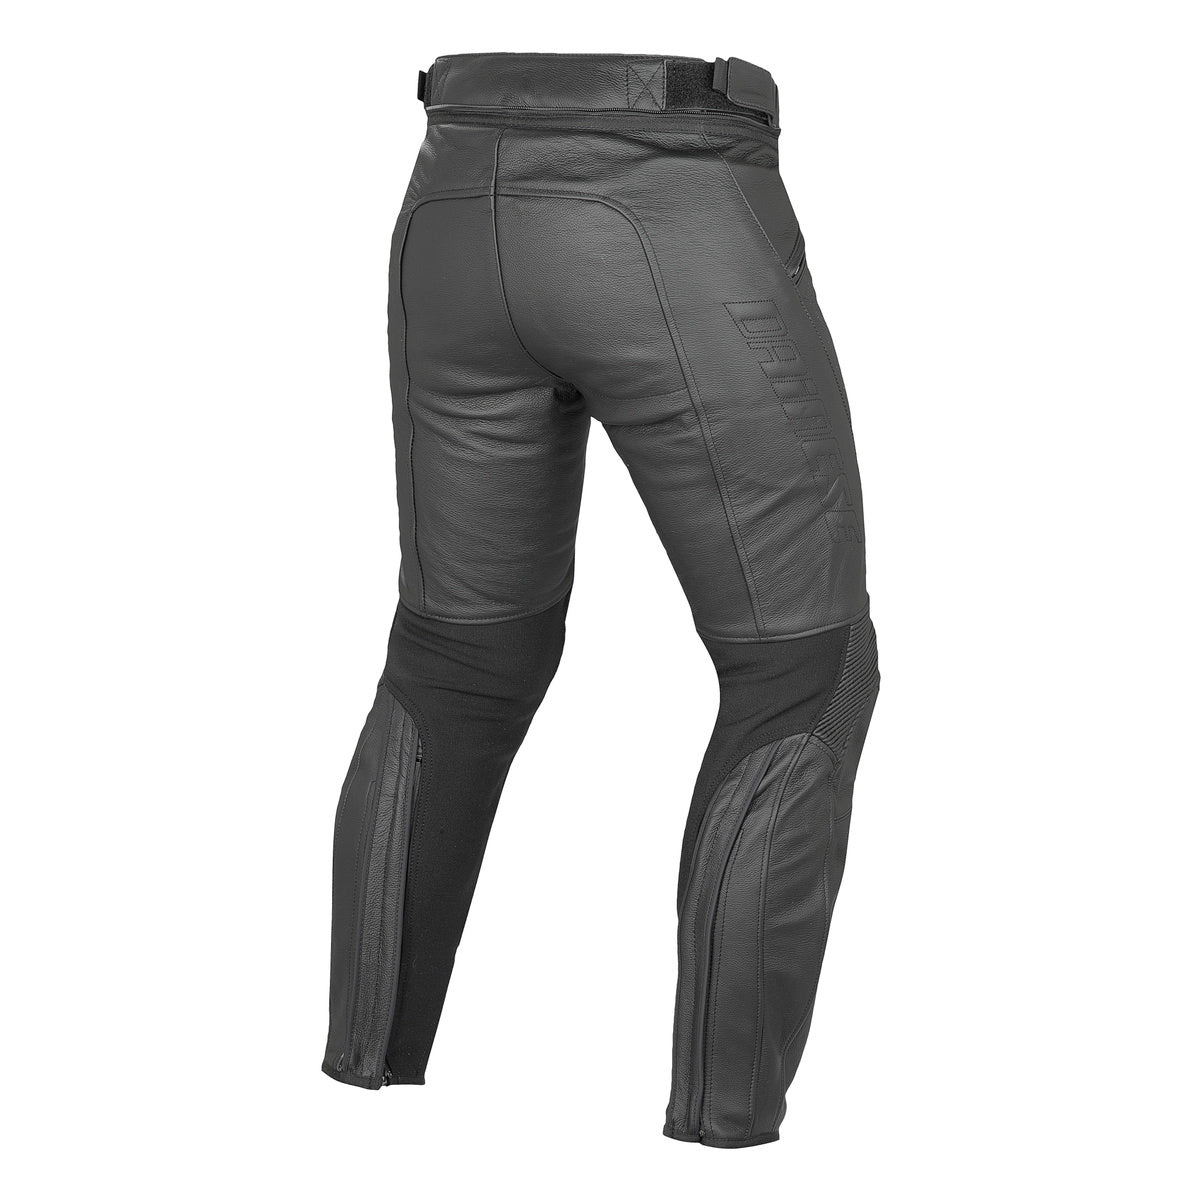 Dainese Pony C2 Perforated Leather Pants